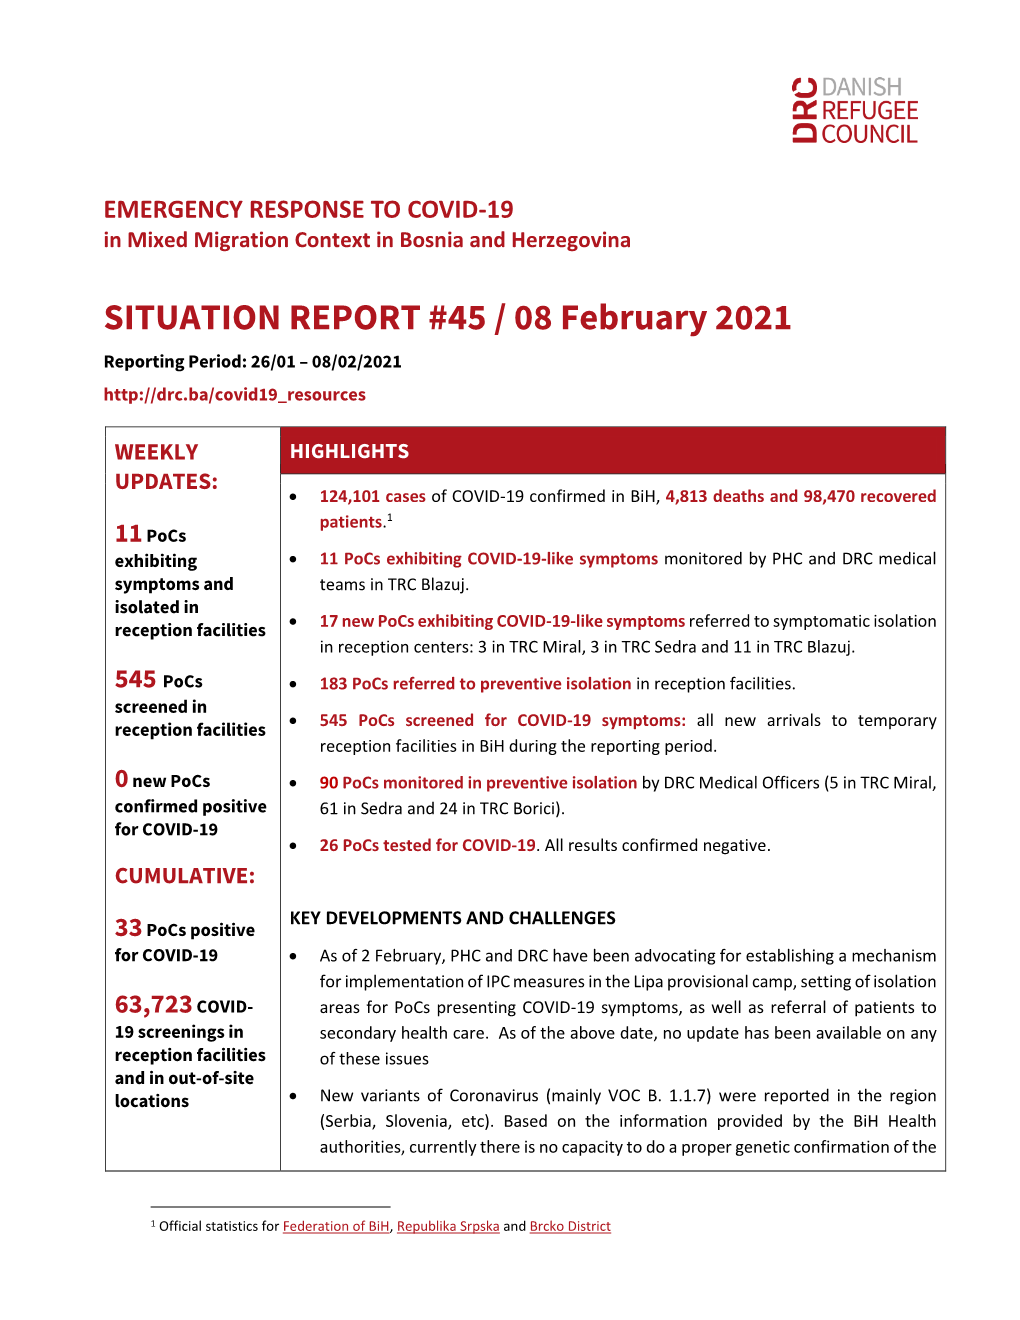 SITUATION REPORT #45 / 08 February 2021 Reporting Period: 26/01 – 08/02/2021